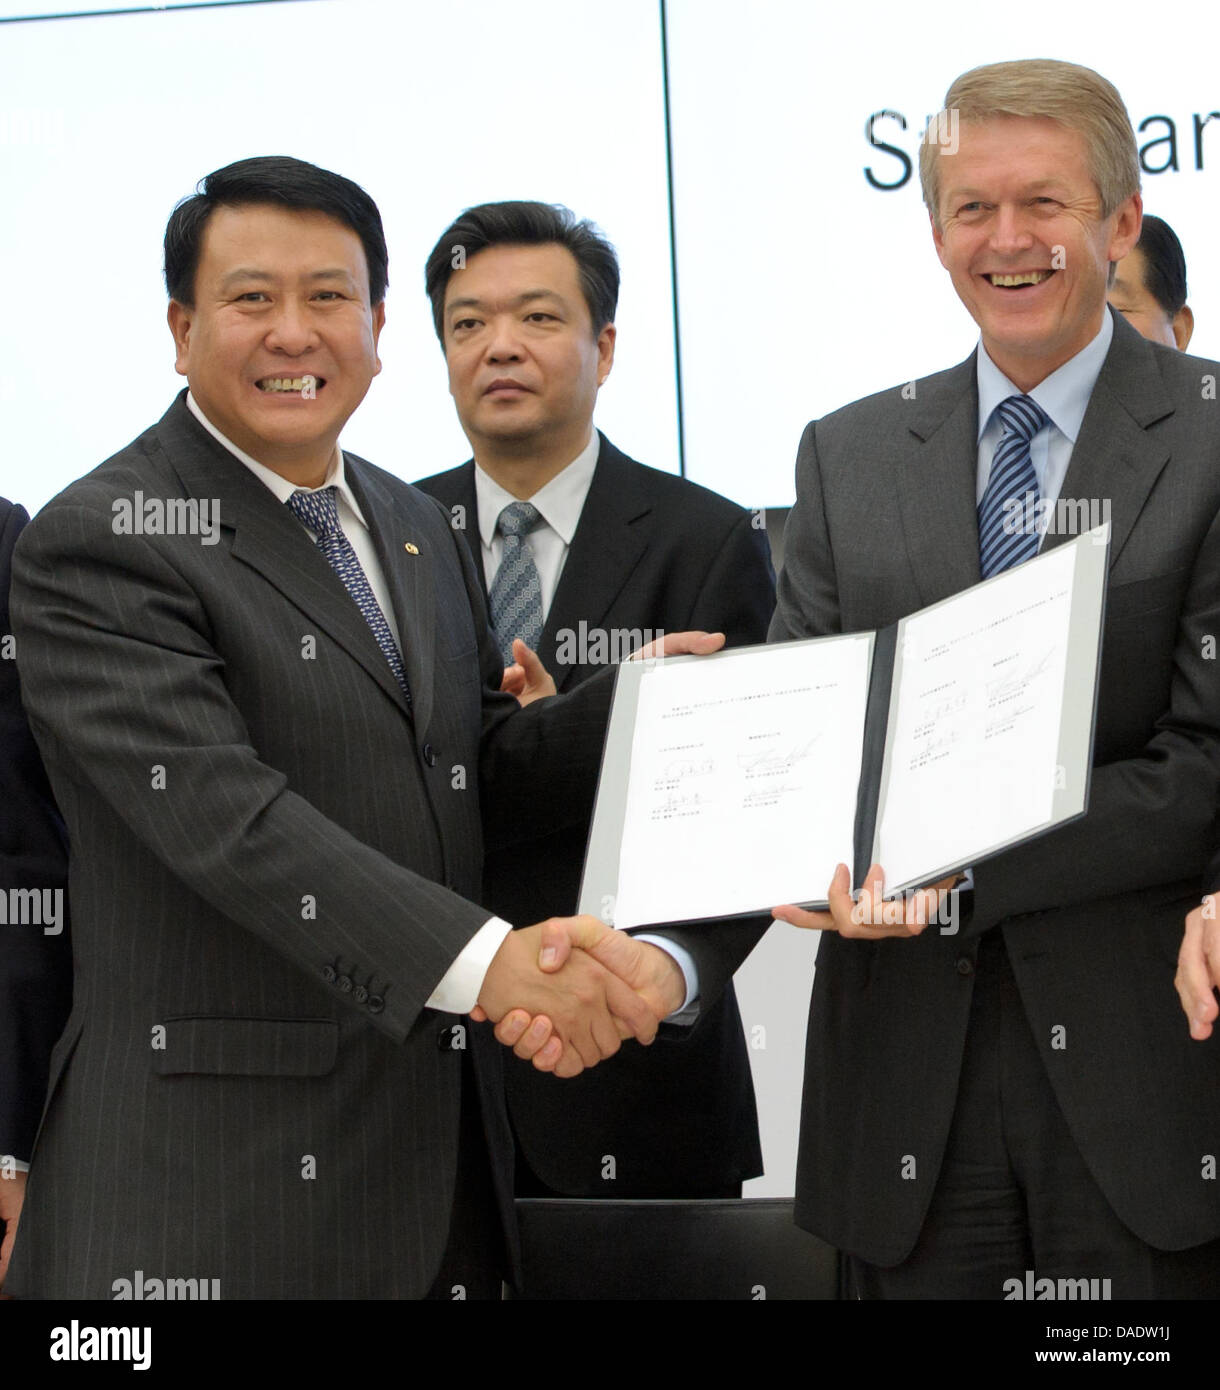 Chairman of Chinese car manufacturer BAIC, Xu Heyi (L), and research and development chairman of Daimler and Mercedes Benz Cars, Thomas Weber (R), shake hands after signing  a declaration of intent between Daimler and BAIC in a Daimler factory in Sindelfingen, Germany, 02 November 2011. Deputy Mayor of Bejing, Ji Lin (C) claps hands. The car manufacturer Daimler and the Chinese par Stock Photo